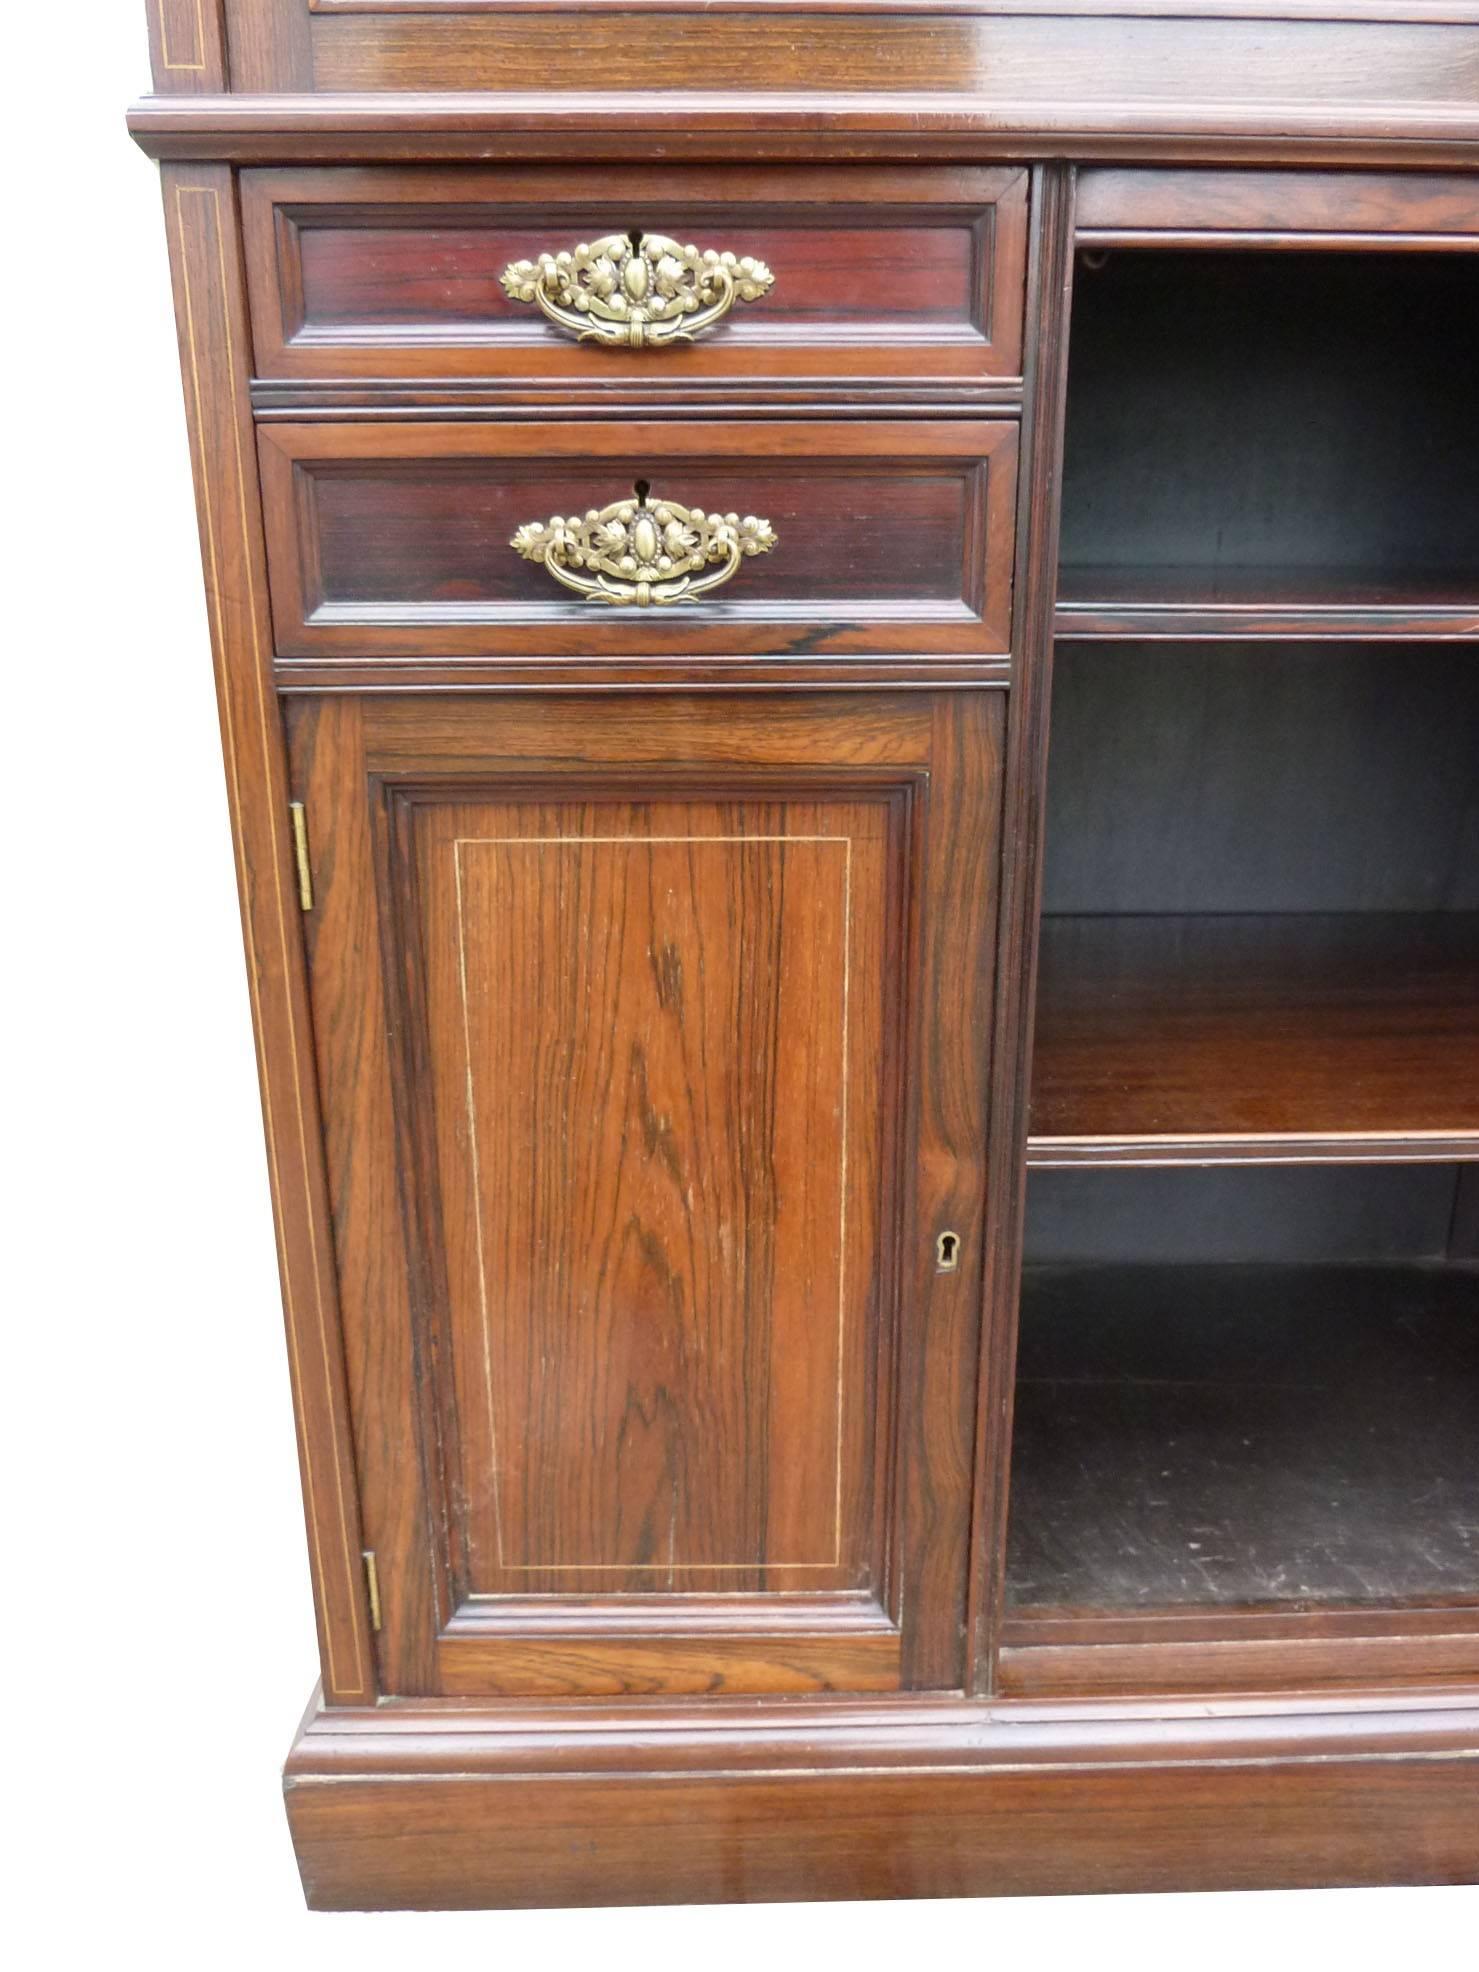 For sale is a very good quality Edwardian rosewood and inlaid chiffonier. The upstand with a mirror, supported by two beautifully turned columns above profusely inlaid drawers, with two further cabinets below and shelf space to the centre. This